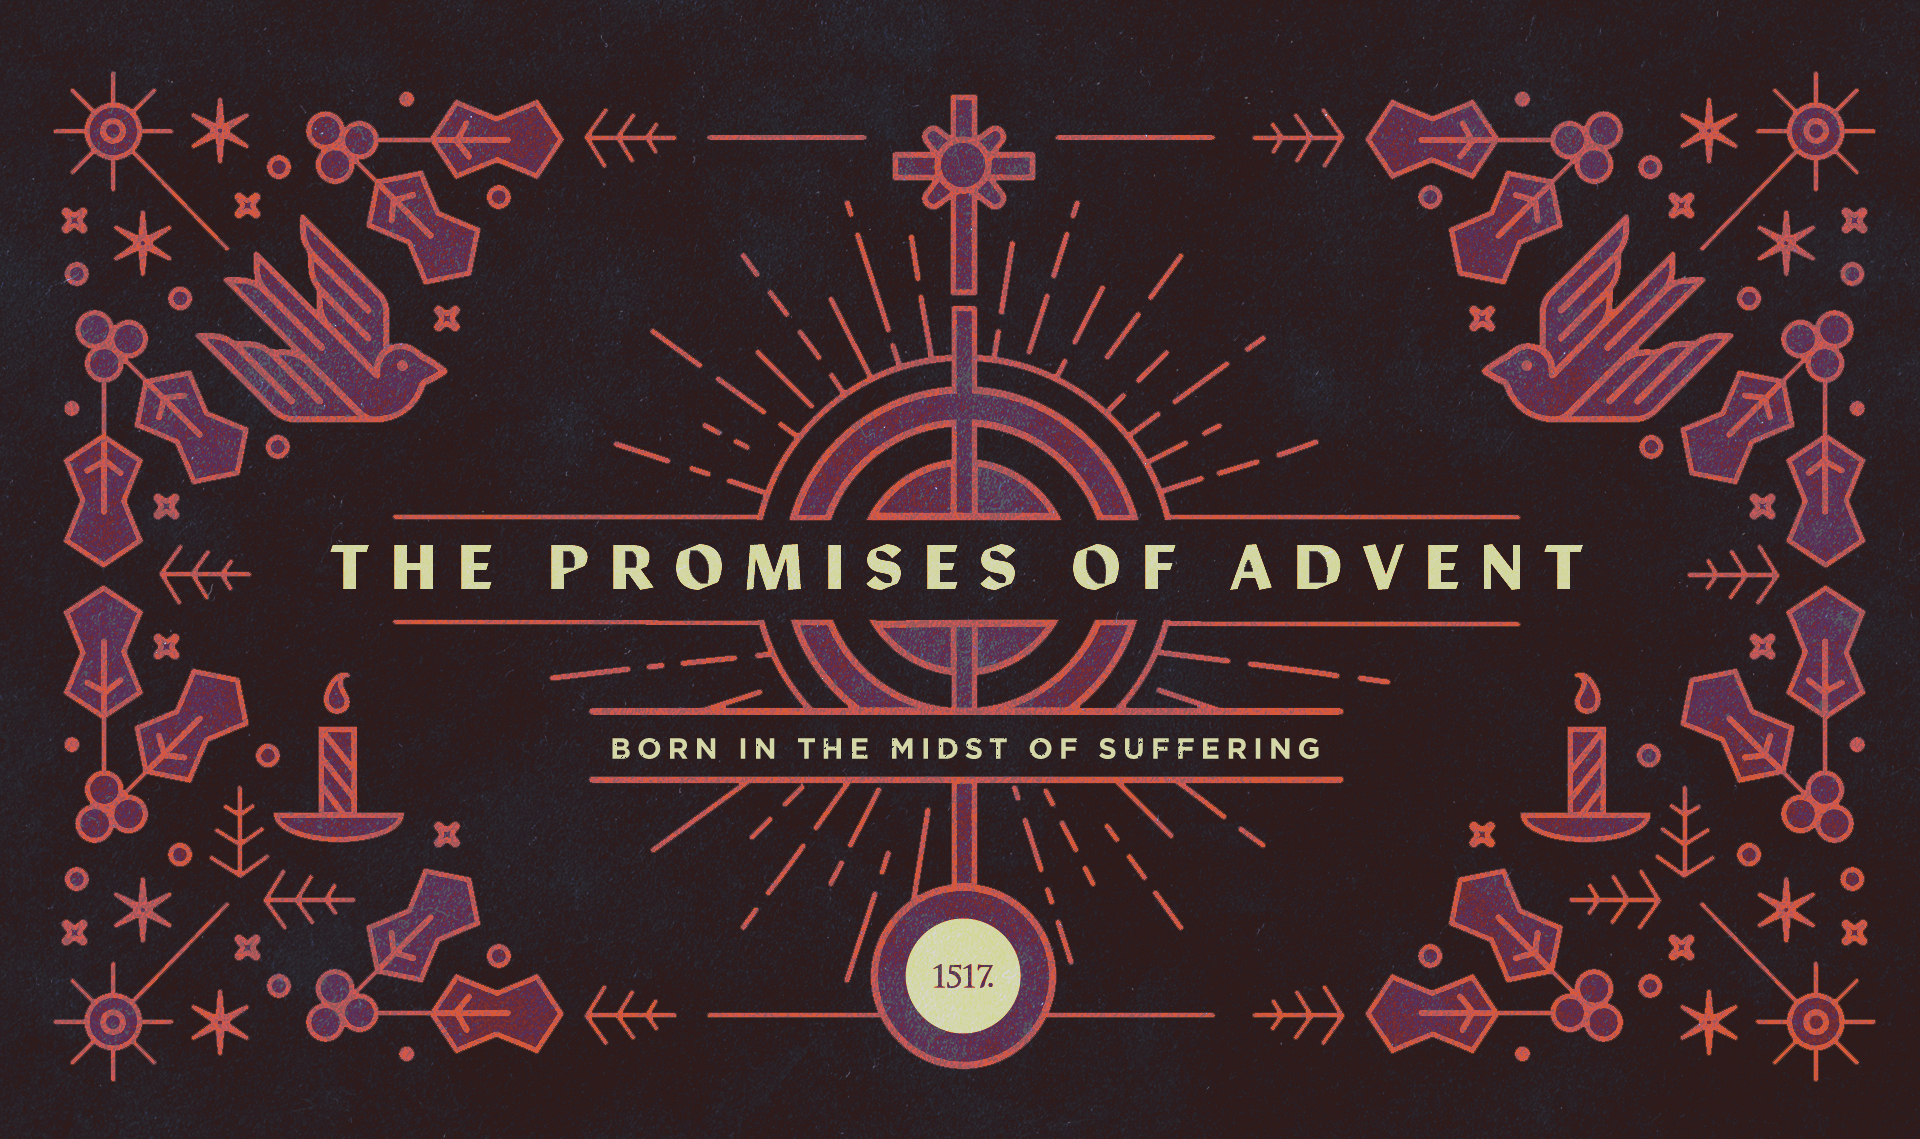 The Promises of Advent: Born in the Midst of Suffering